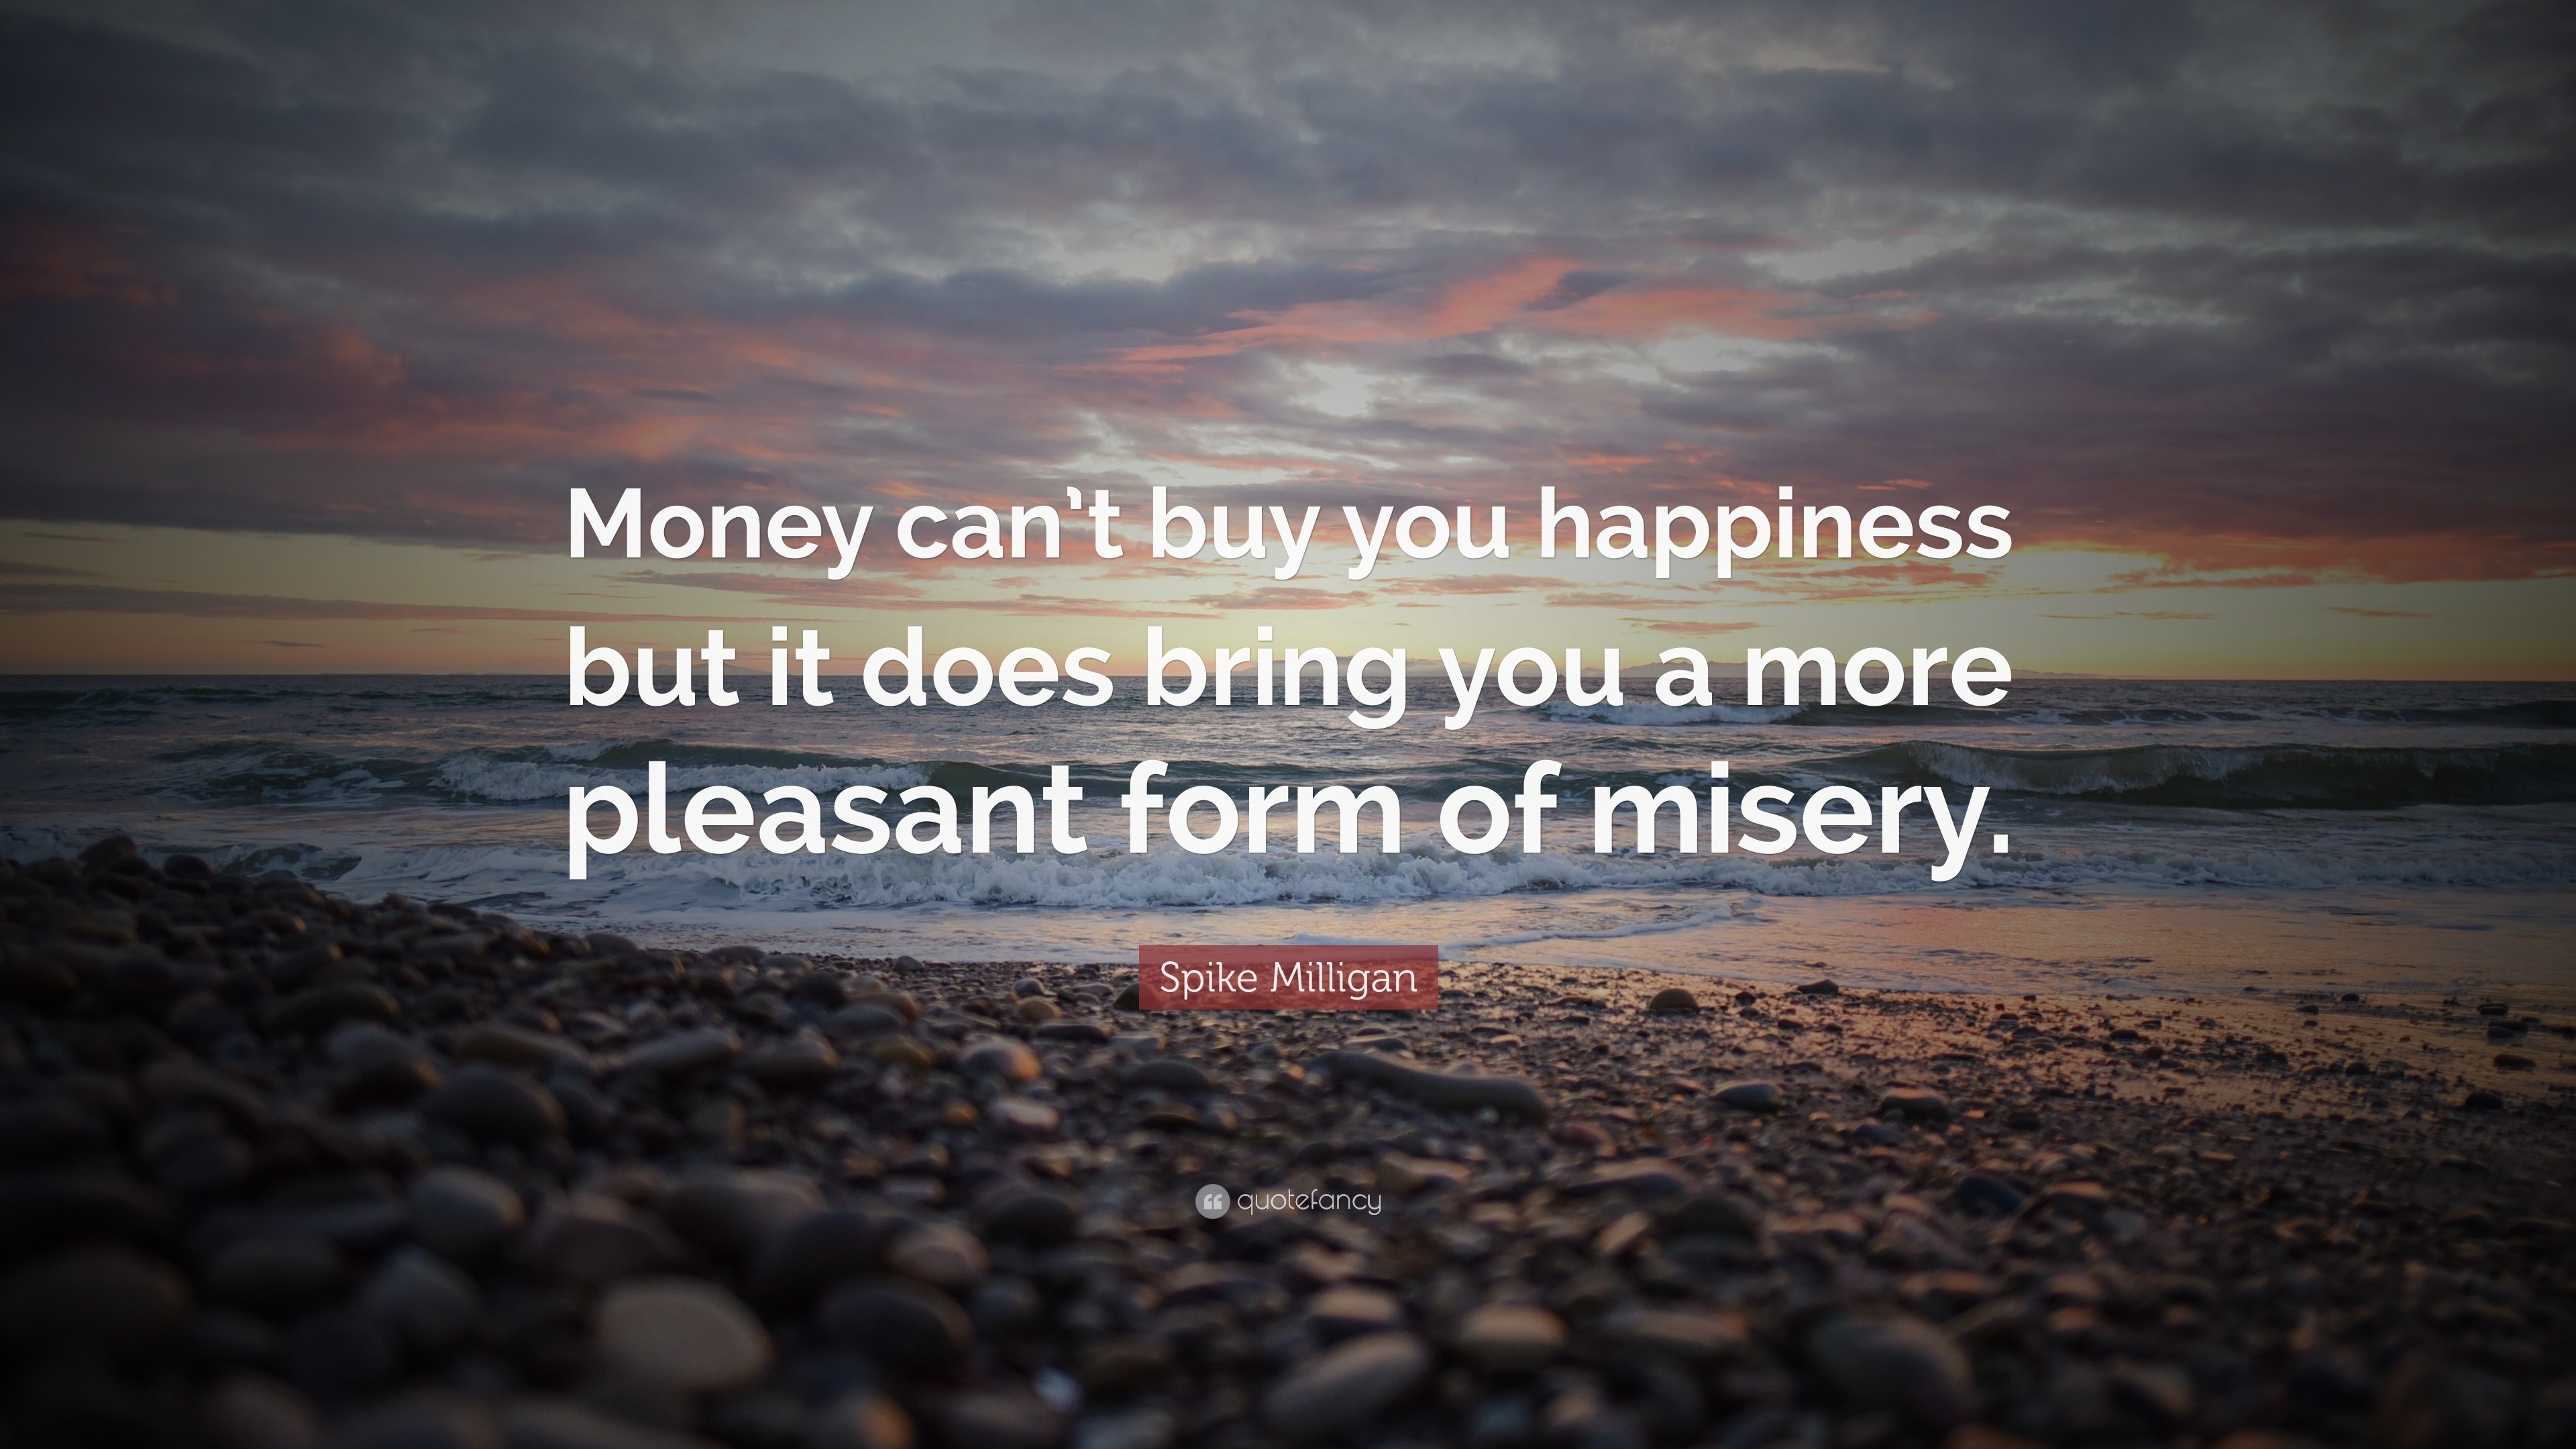 Spike Milligan Quote “Money can’t buy you happiness but it does bring